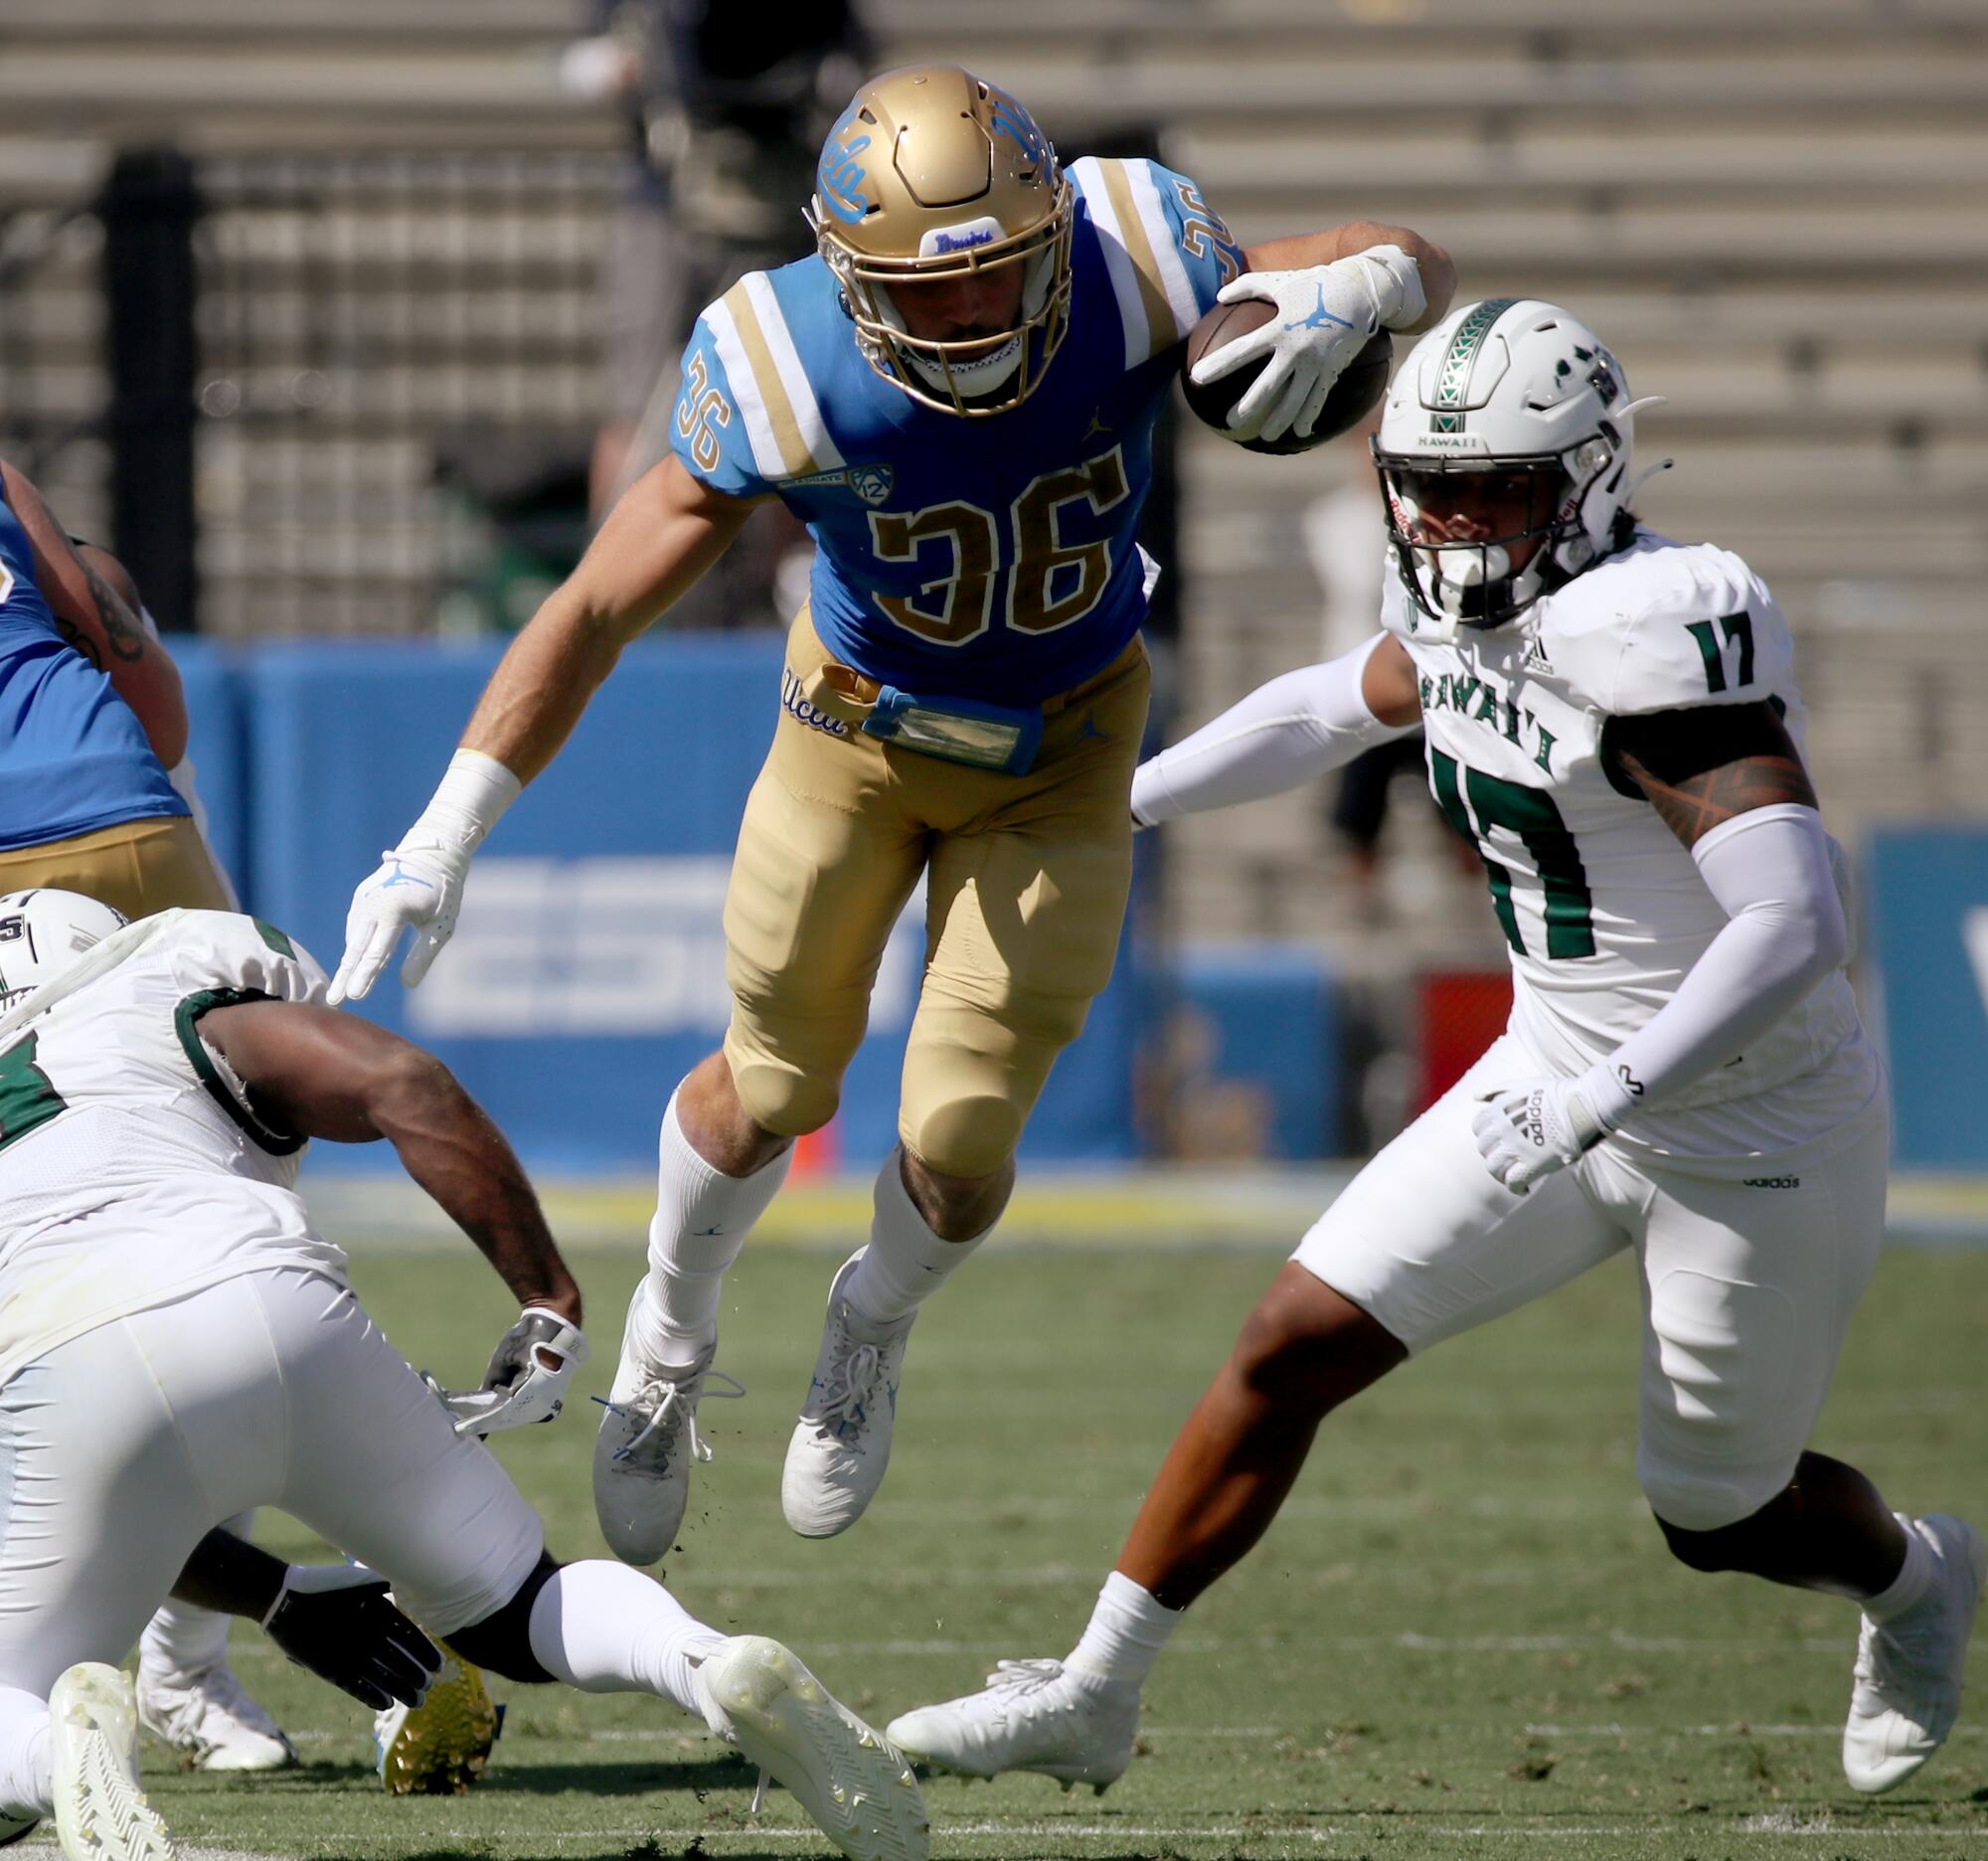 UCLA running back Ethan Femea fights for extra yards against Hawaii in the third quarter.